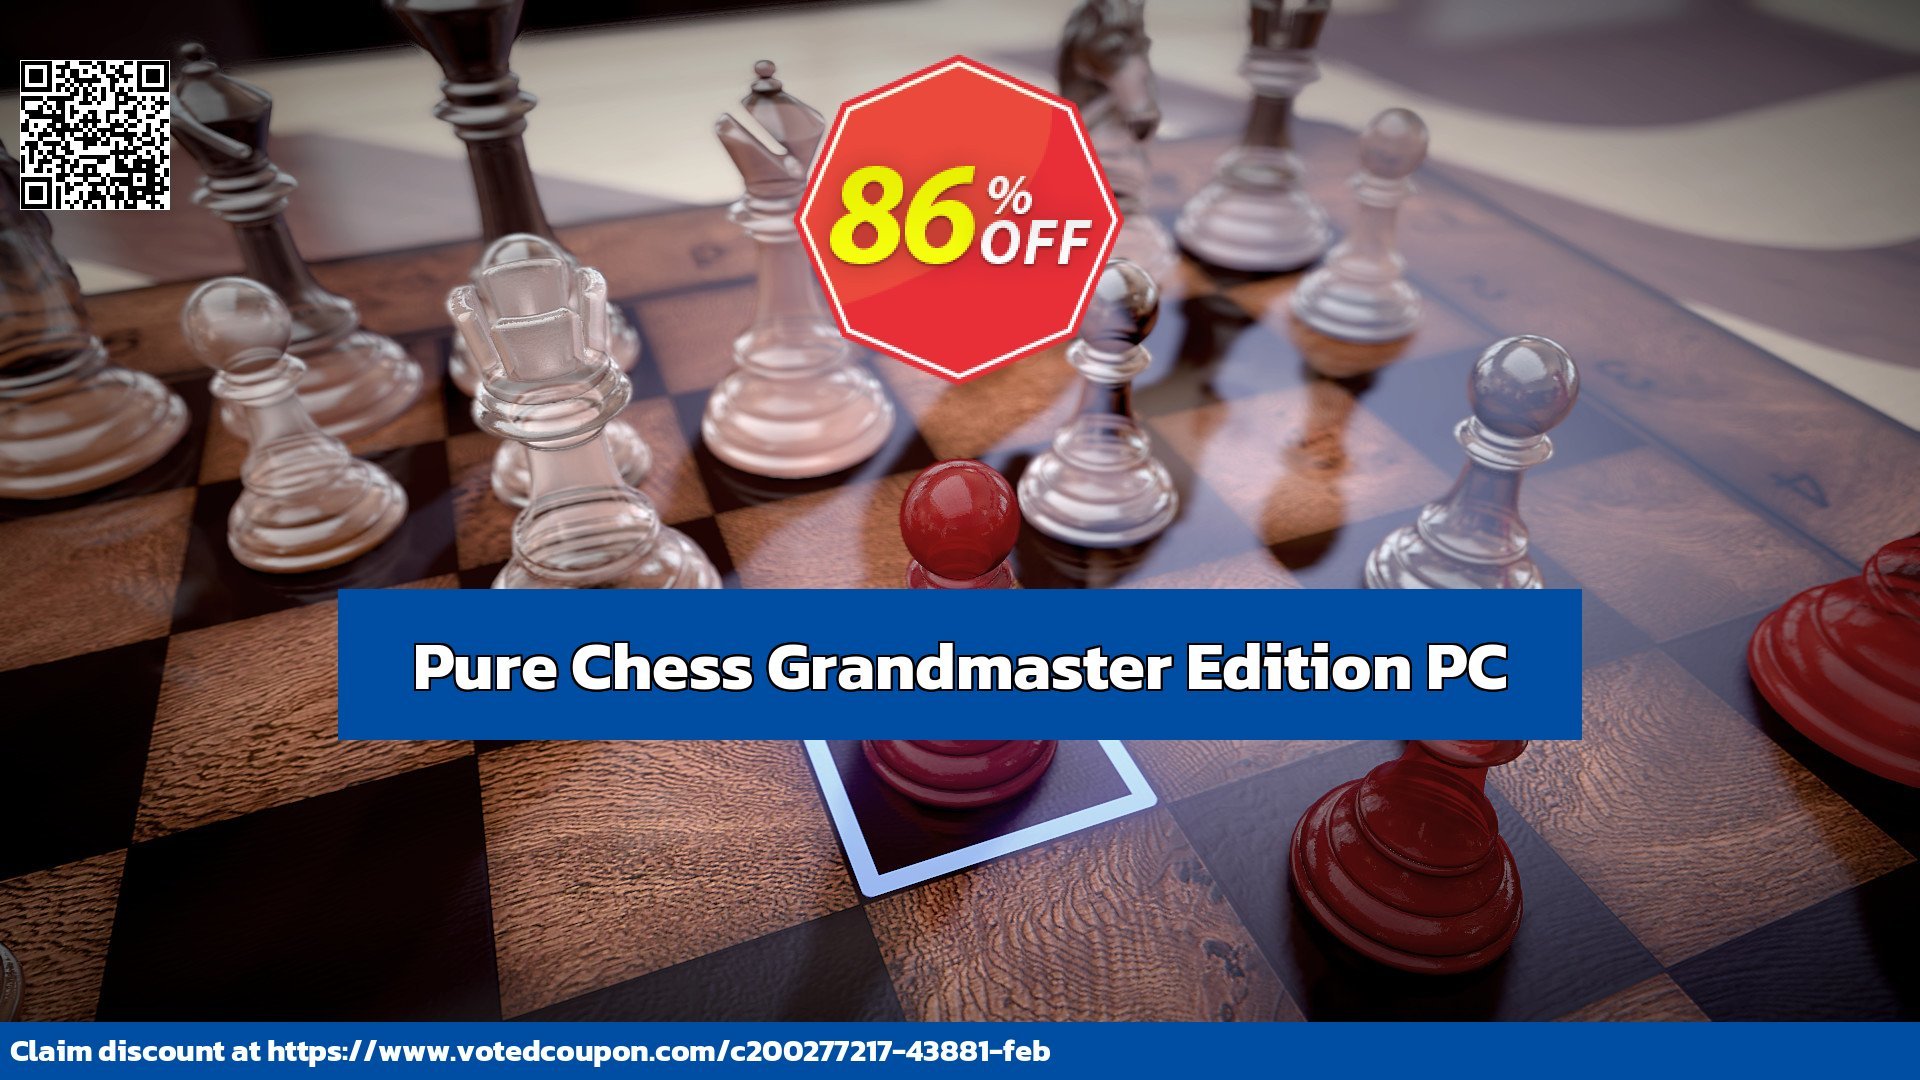 Pure Chess Grandmaster Edition PC Coupon Code May 2024, 86% OFF - VotedCoupon